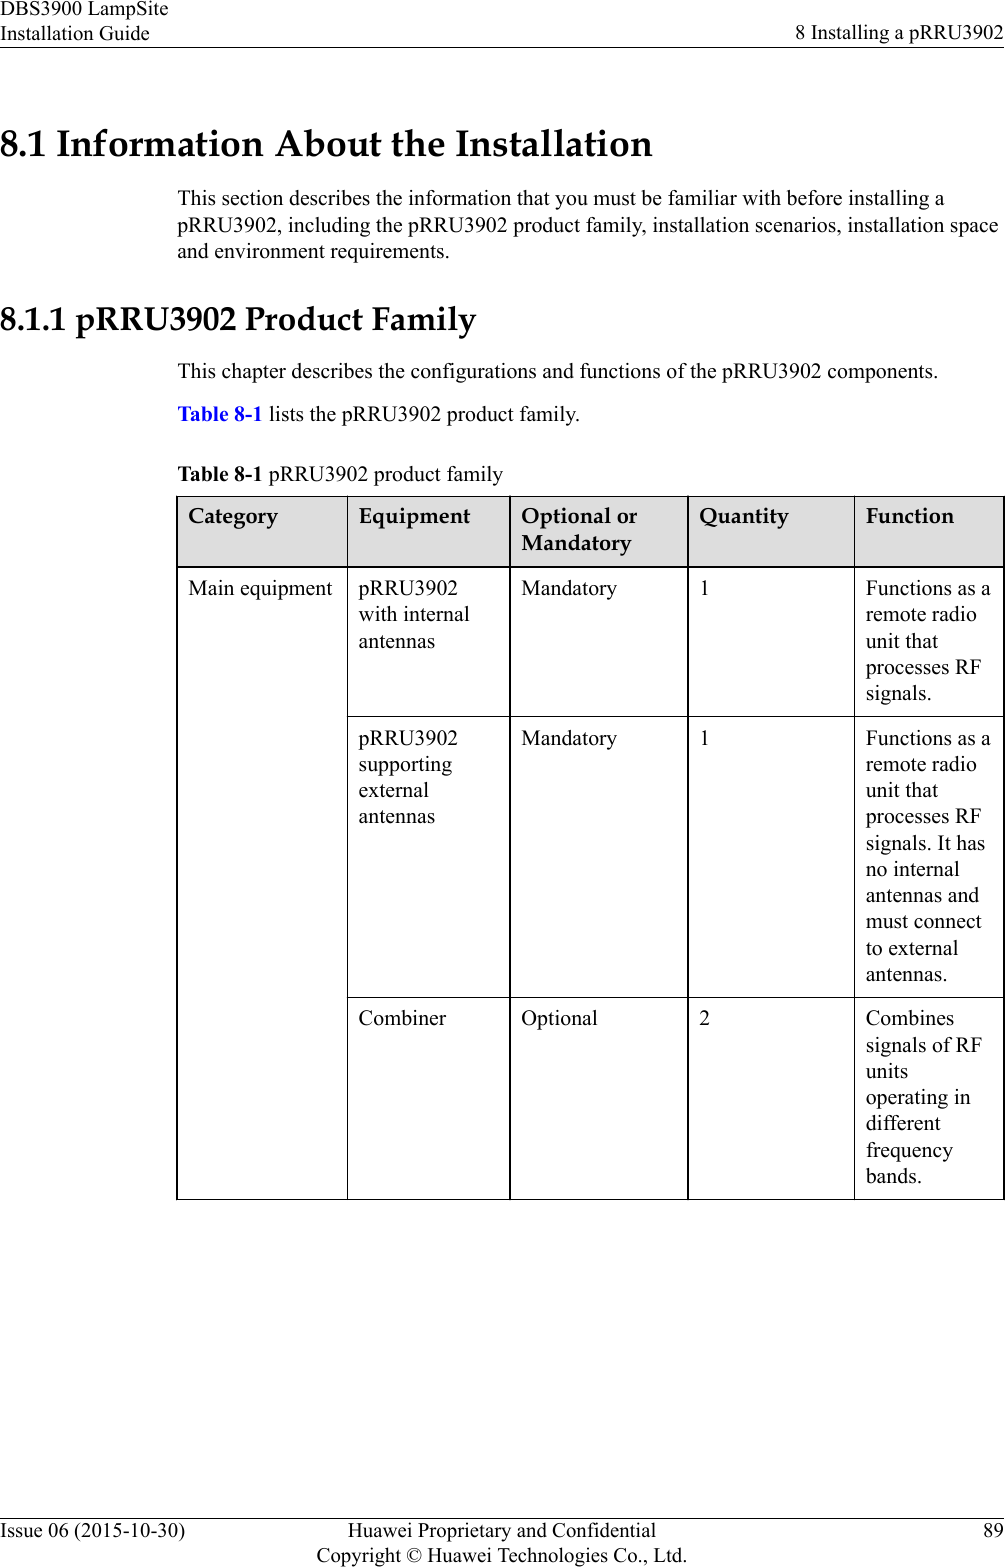 8.1 Information About the InstallationThis section describes the information that you must be familiar with before installing apRRU3902, including the pRRU3902 product family, installation scenarios, installation spaceand environment requirements.8.1.1 pRRU3902 Product FamilyThis chapter describes the configurations and functions of the pRRU3902 components.Table 8-1 lists the pRRU3902 product family.Table 8-1 pRRU3902 product familyCategory Equipment Optional orMandatoryQuantity FunctionMain equipment pRRU3902with internalantennasMandatory 1 Functions as aremote radiounit thatprocesses RFsignals.pRRU3902supportingexternalantennasMandatory 1 Functions as aremote radiounit thatprocesses RFsignals. It hasno internalantennas andmust connectto externalantennas.Combiner Optional 2 Combinessignals of RFunitsoperating indifferentfrequencybands.DBS3900 LampSiteInstallation Guide 8 Installing a pRRU3902Issue 06 (2015-10-30) Huawei Proprietary and ConfidentialCopyright © Huawei Technologies Co., Ltd.89